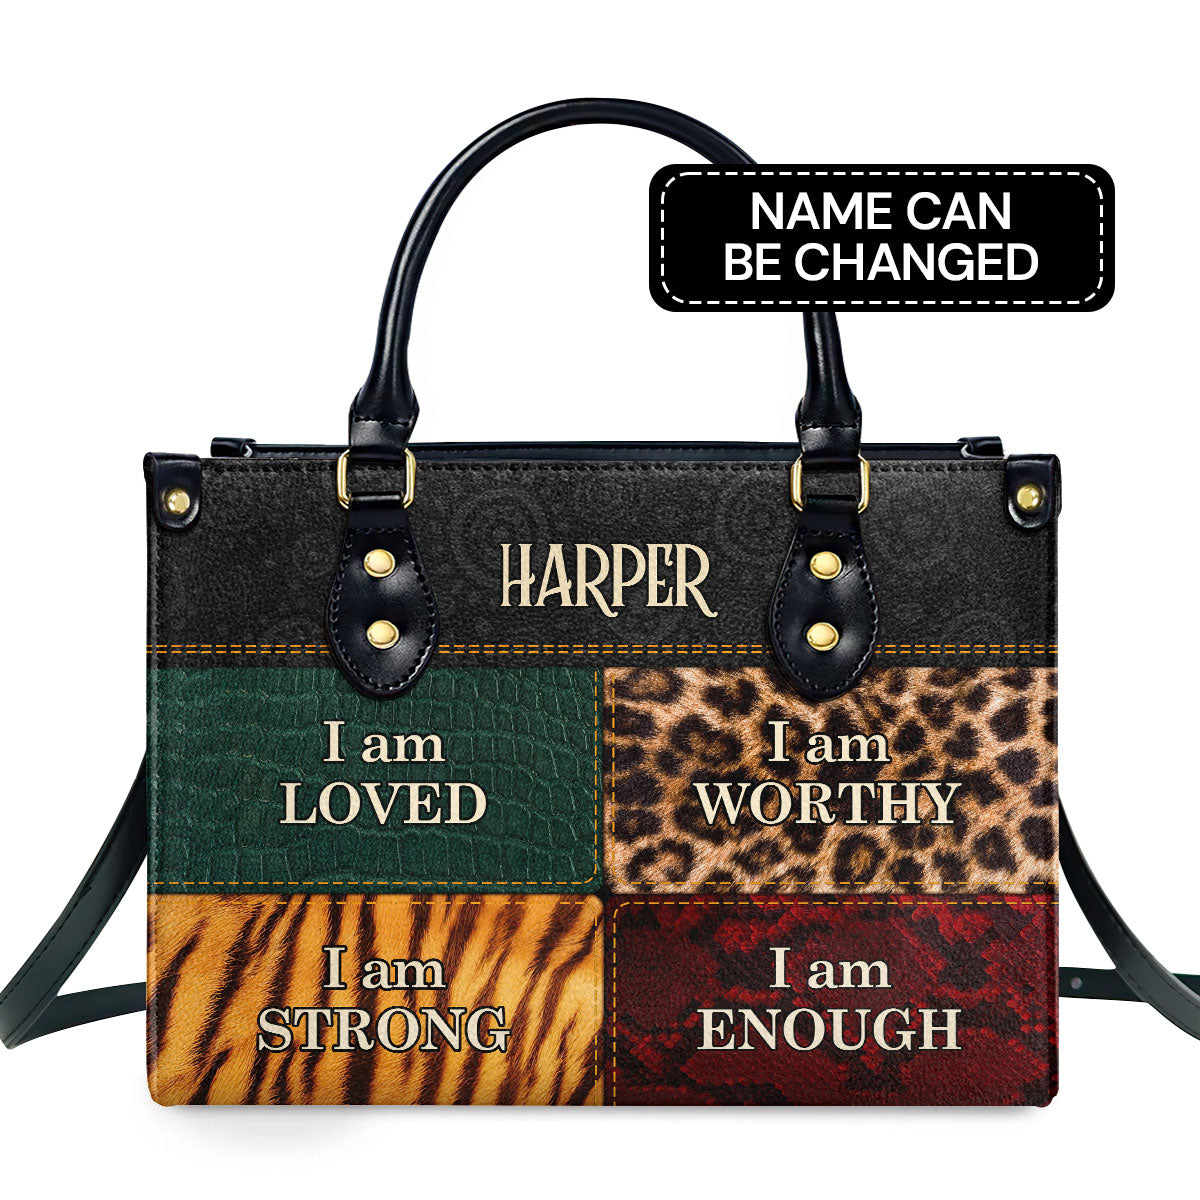 I Am Loved, I am Strong - Personalized Leather Handbag MS989